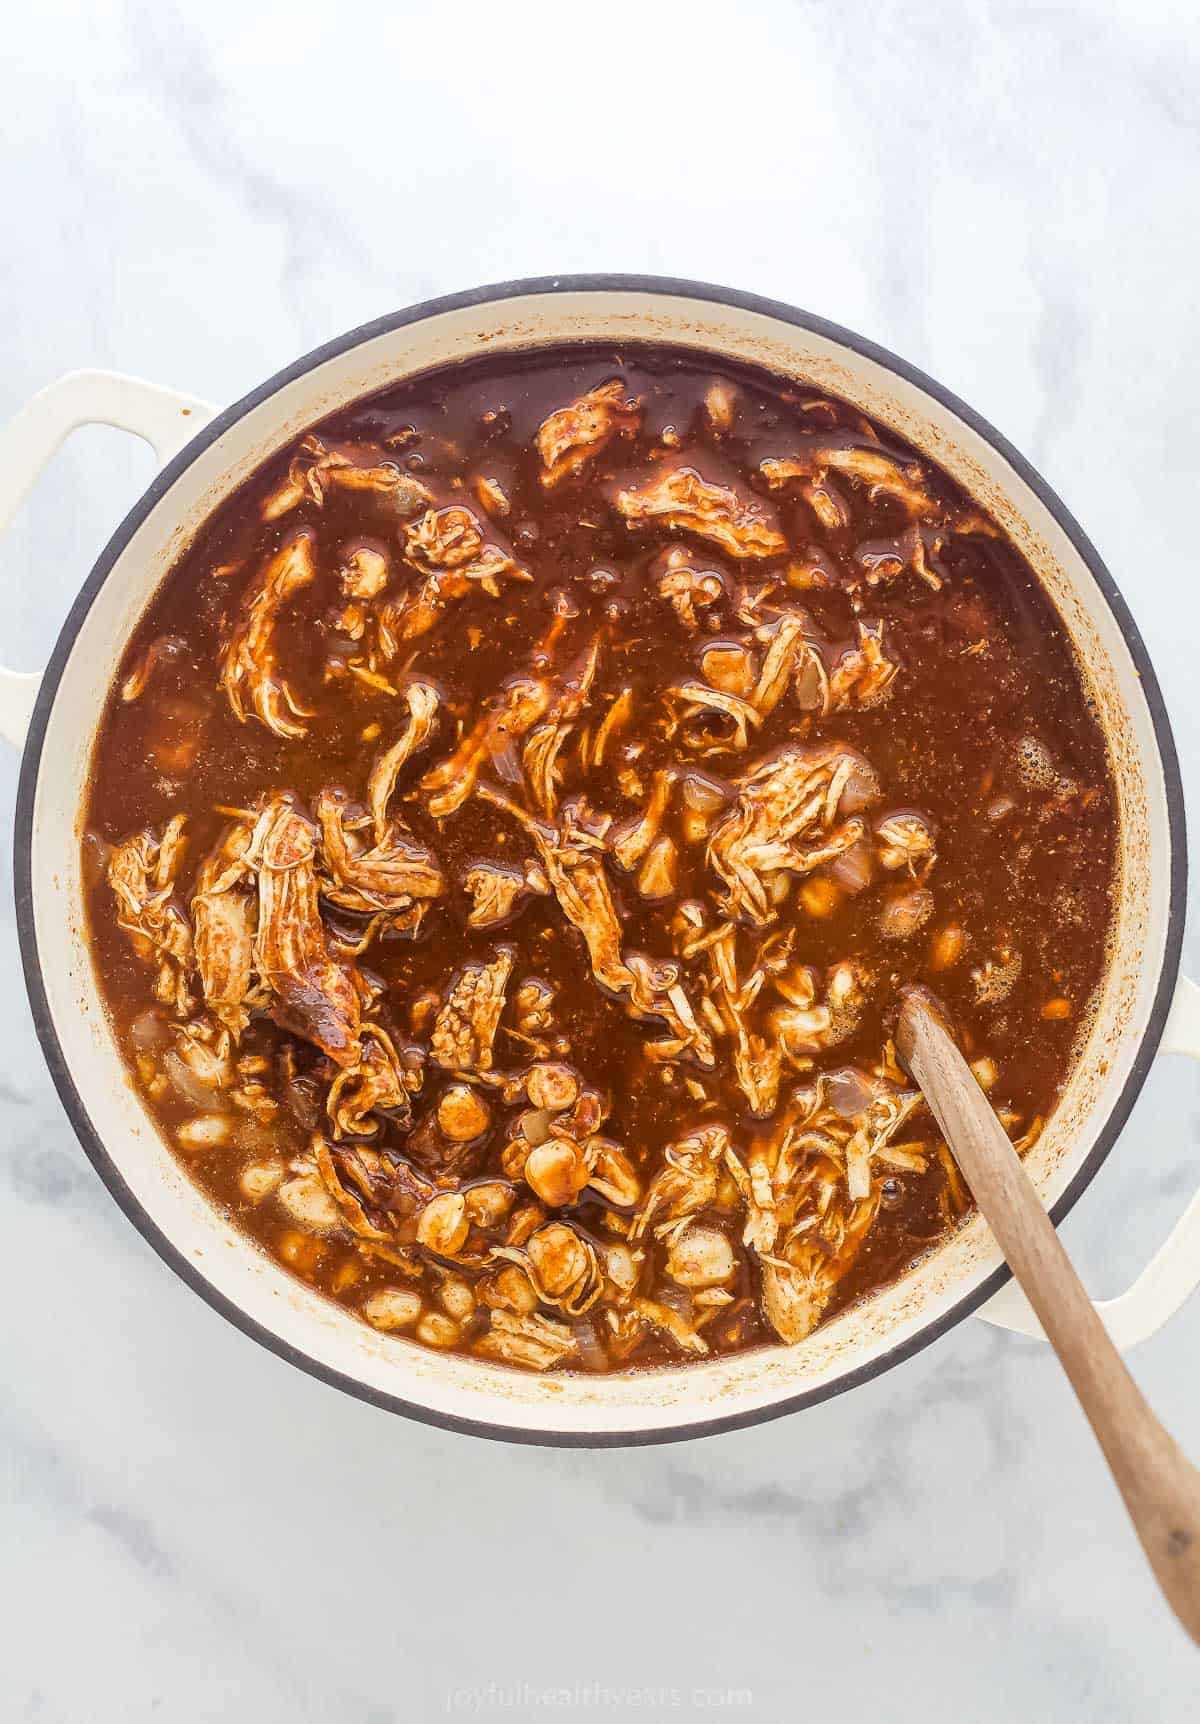 a pot of Mexican Chicken Stew with bits of pulled chicken and hominy in a brown broth